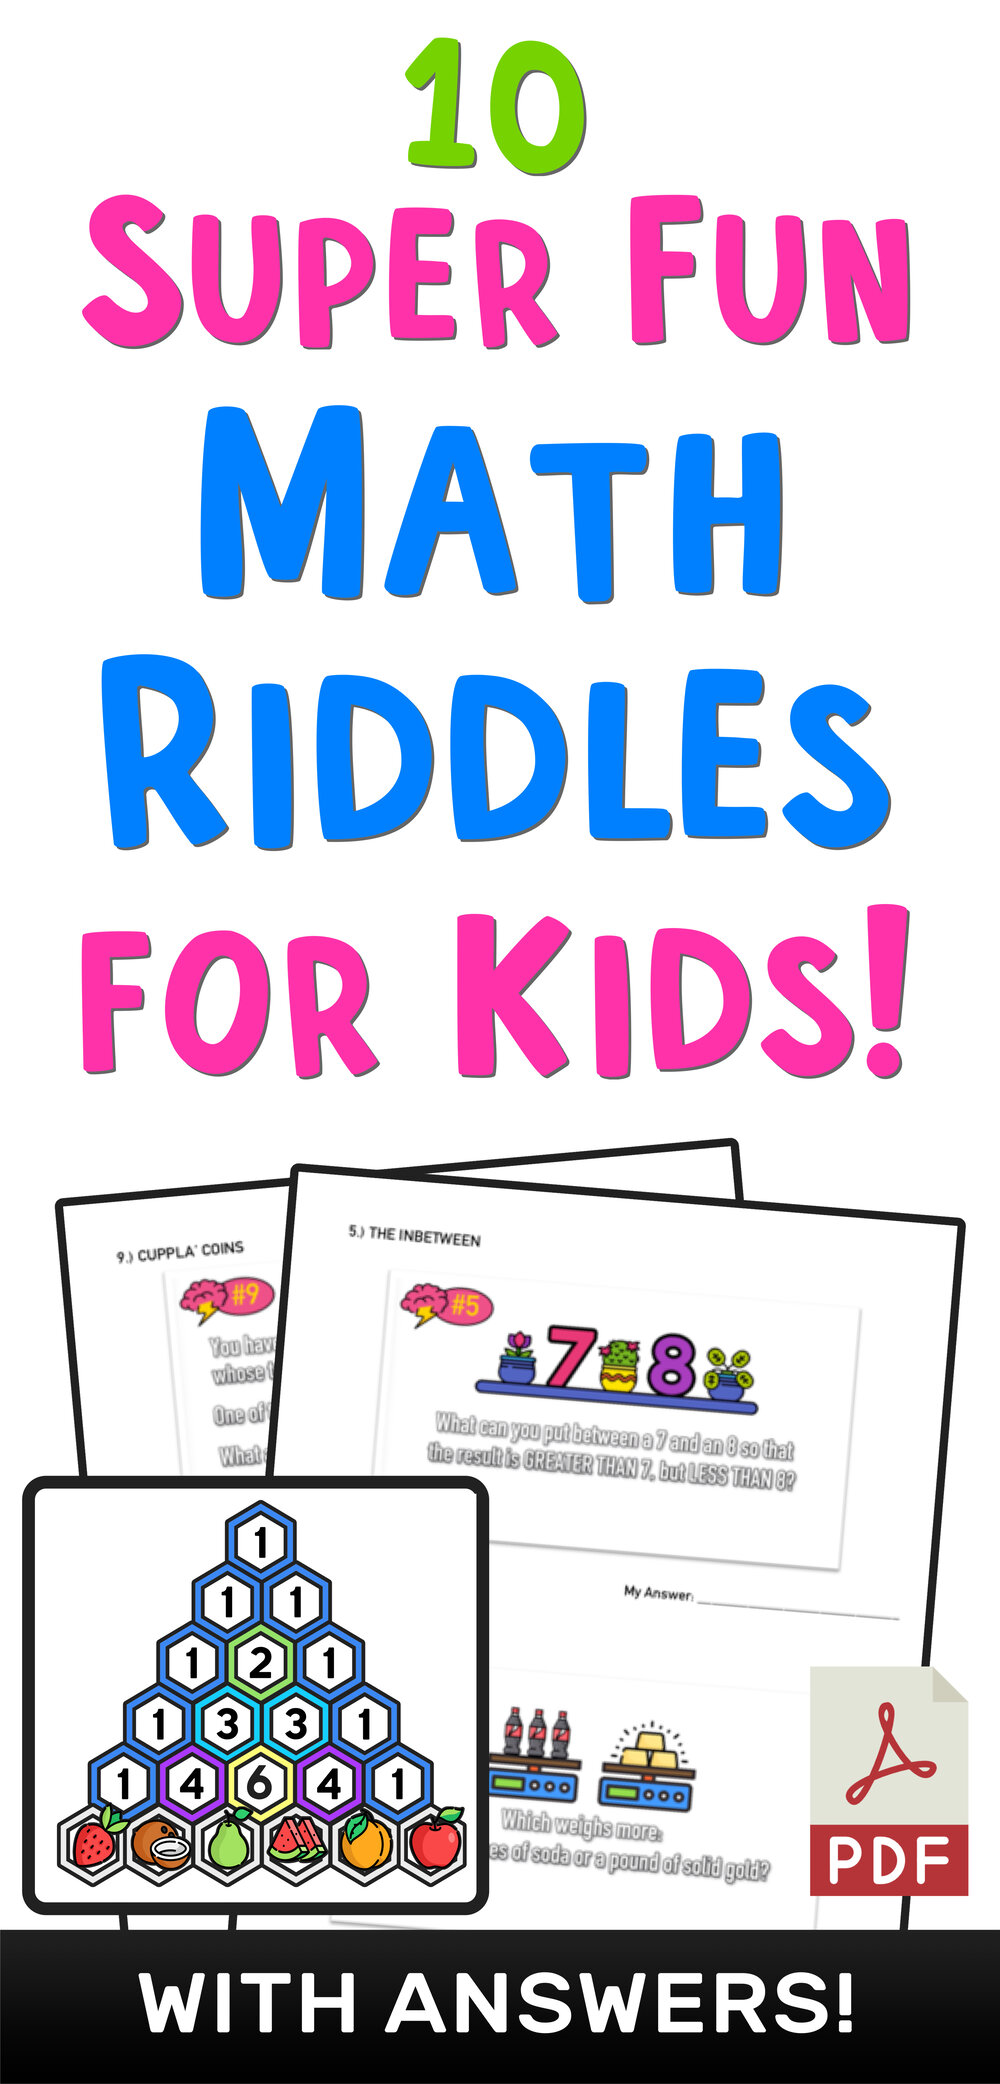 10 super fun math riddles for kids ages 10 with answers mashup math